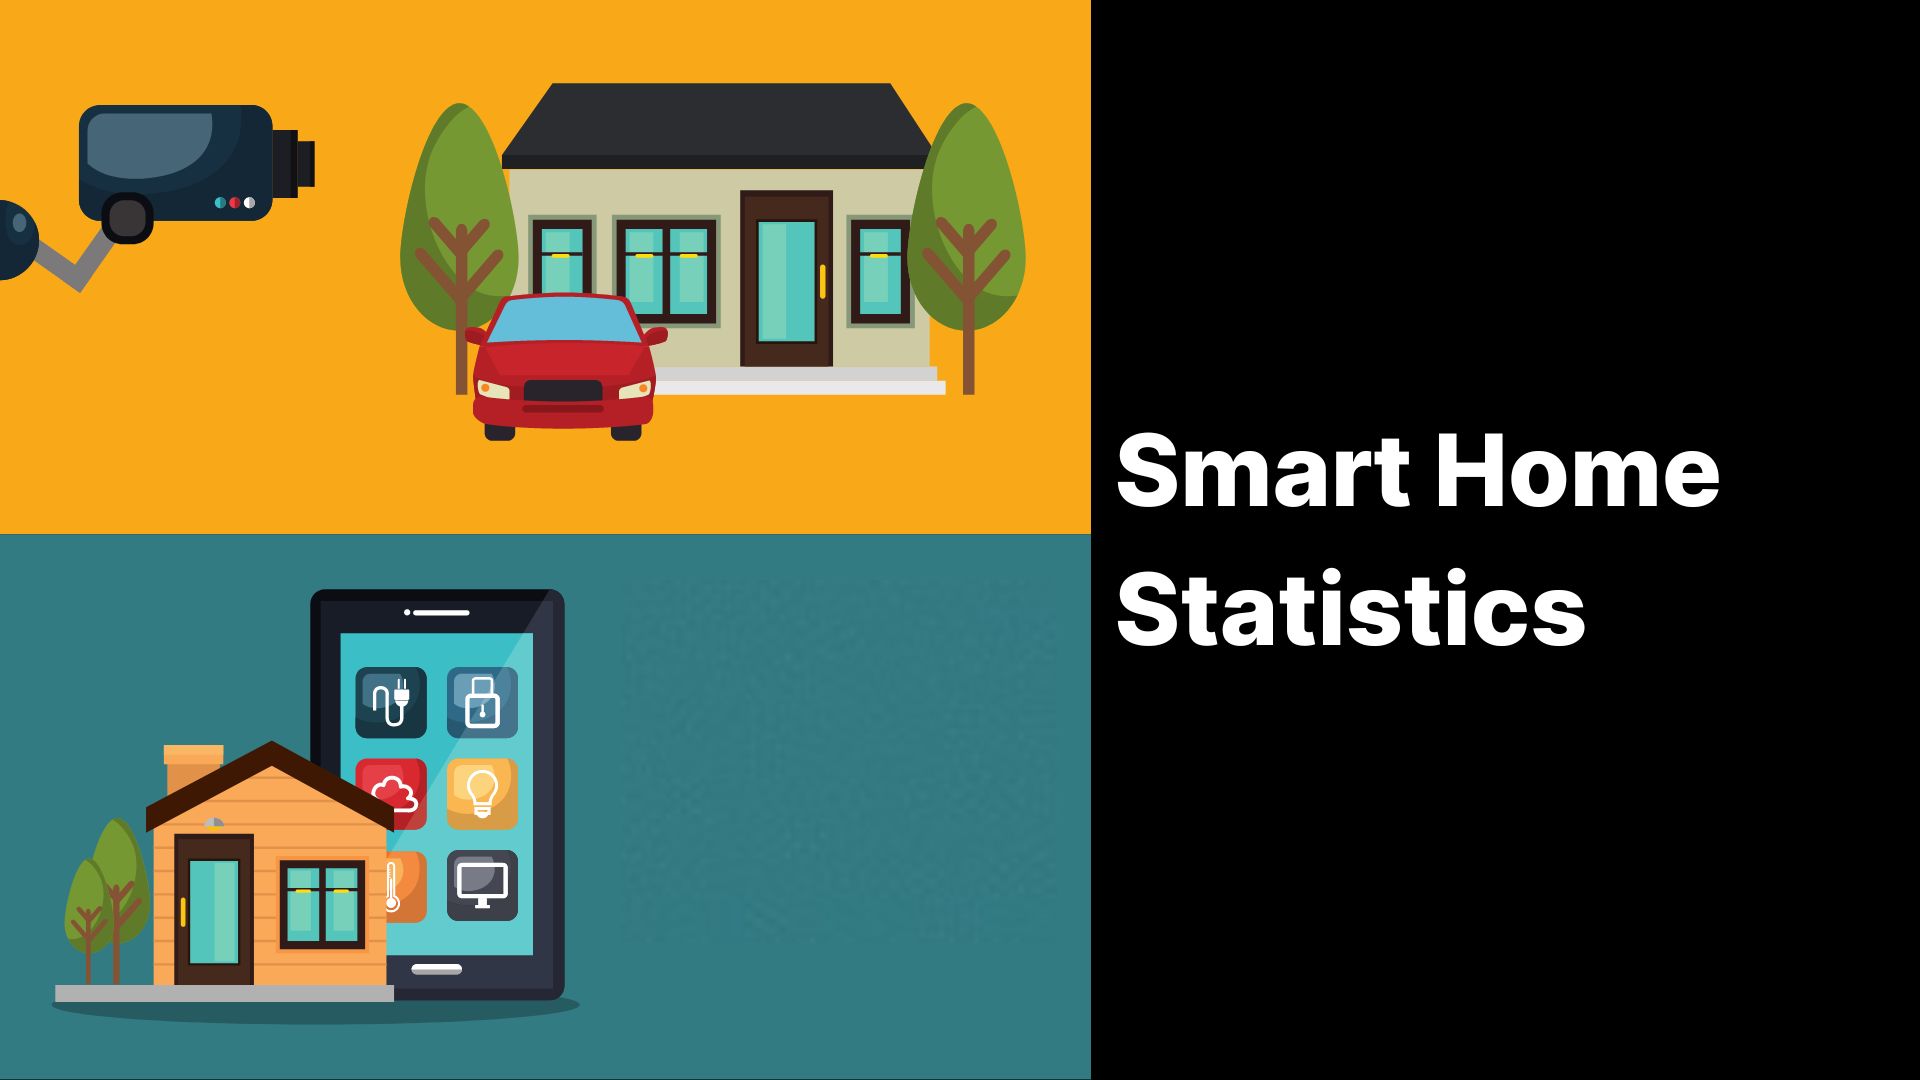 Smart Home Statistics By Region, Cost Saving, Devices, Brands, Demographics and Reasons for Adoption